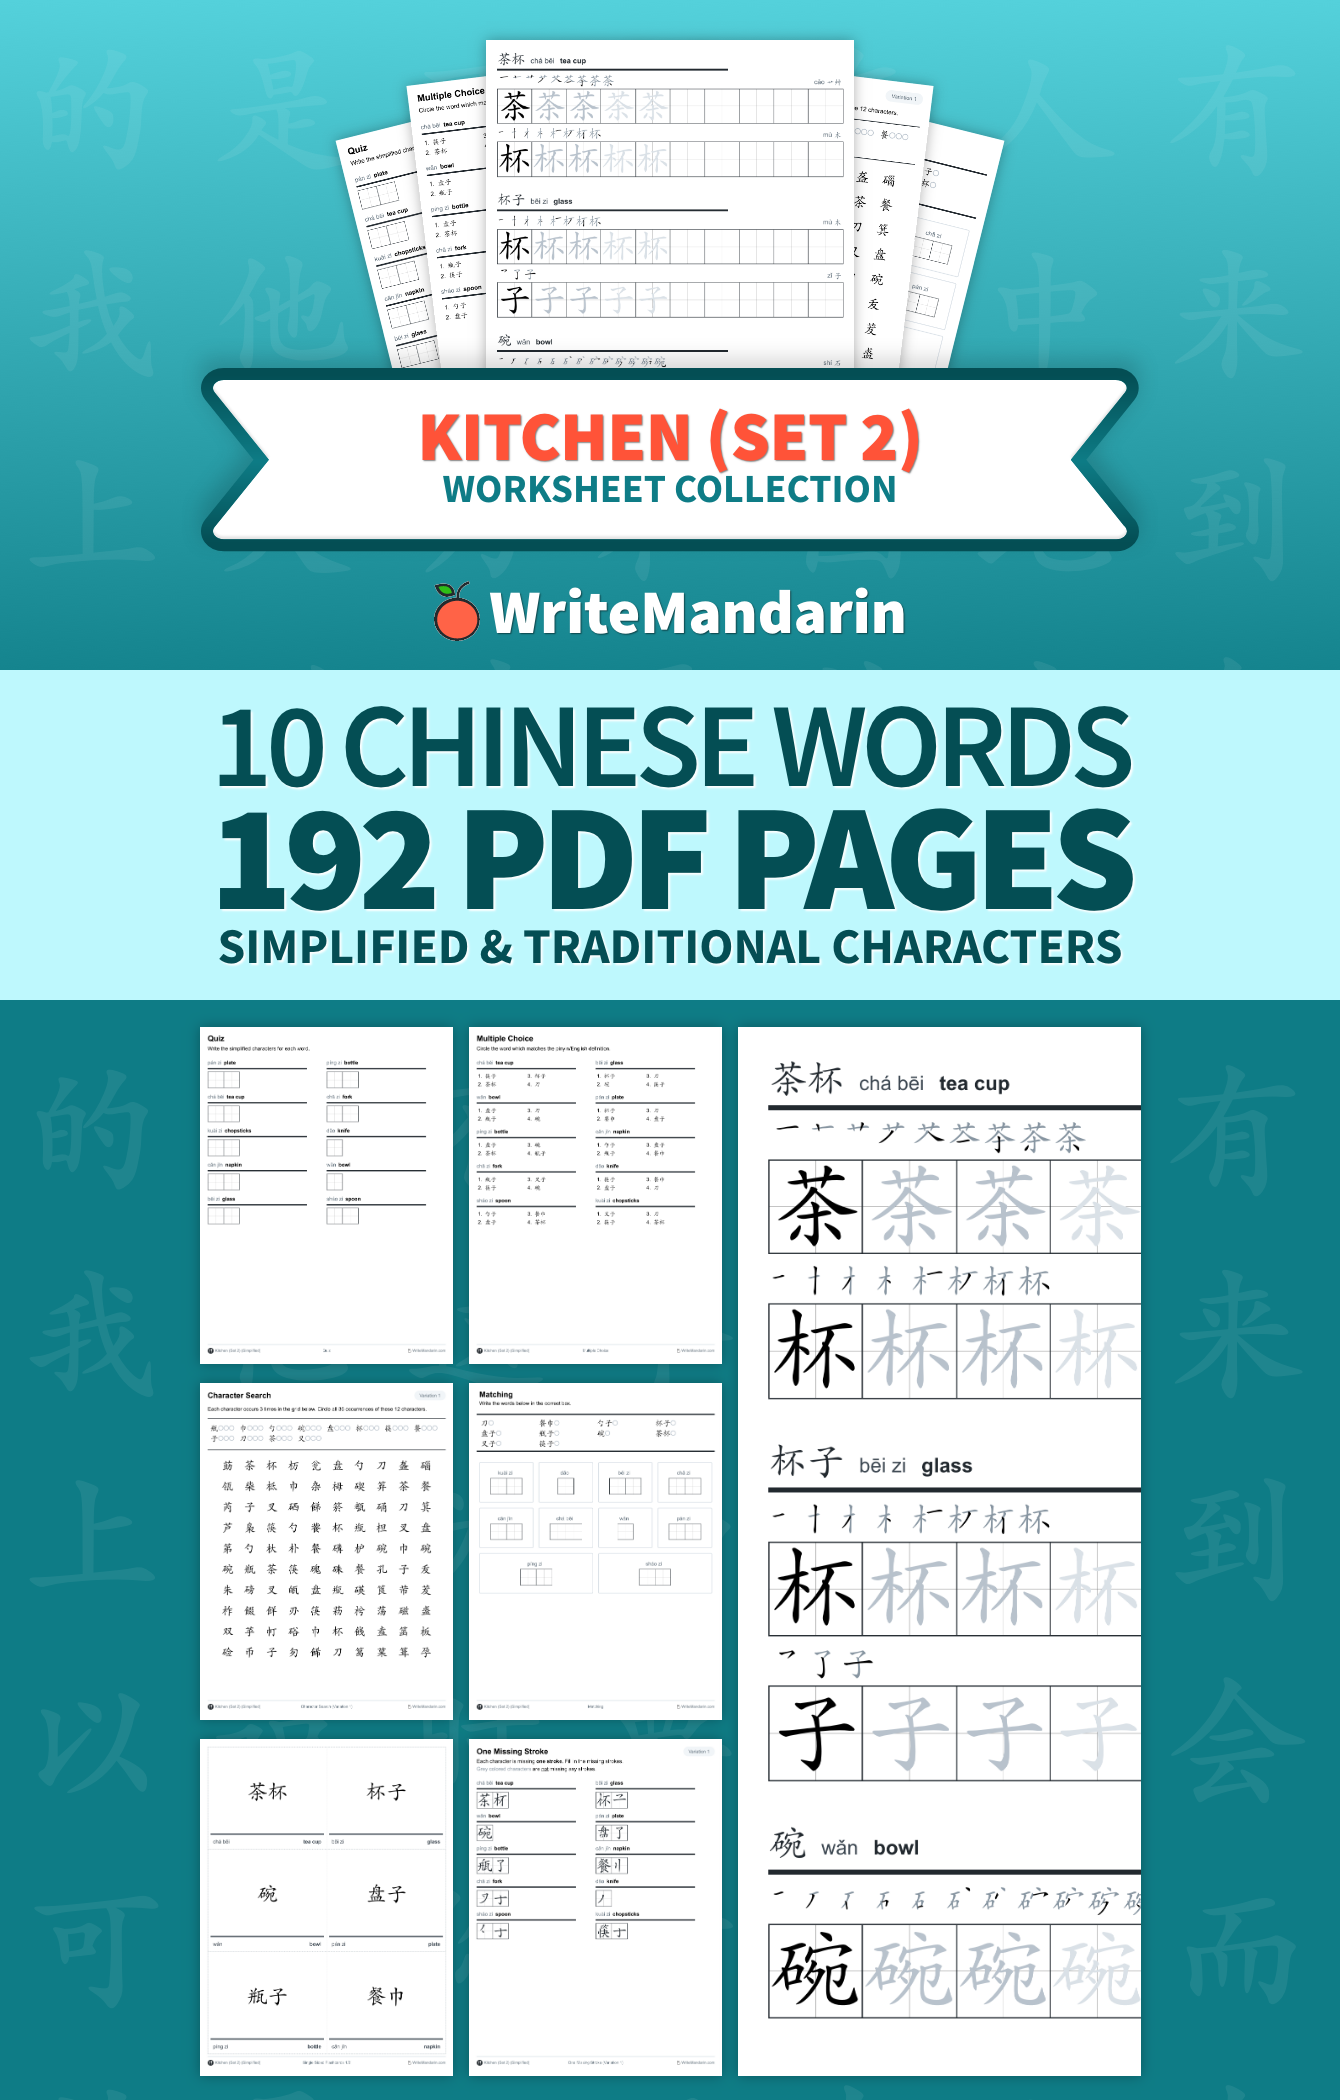 Preview image of Kitchen (Set 2) worksheet collection